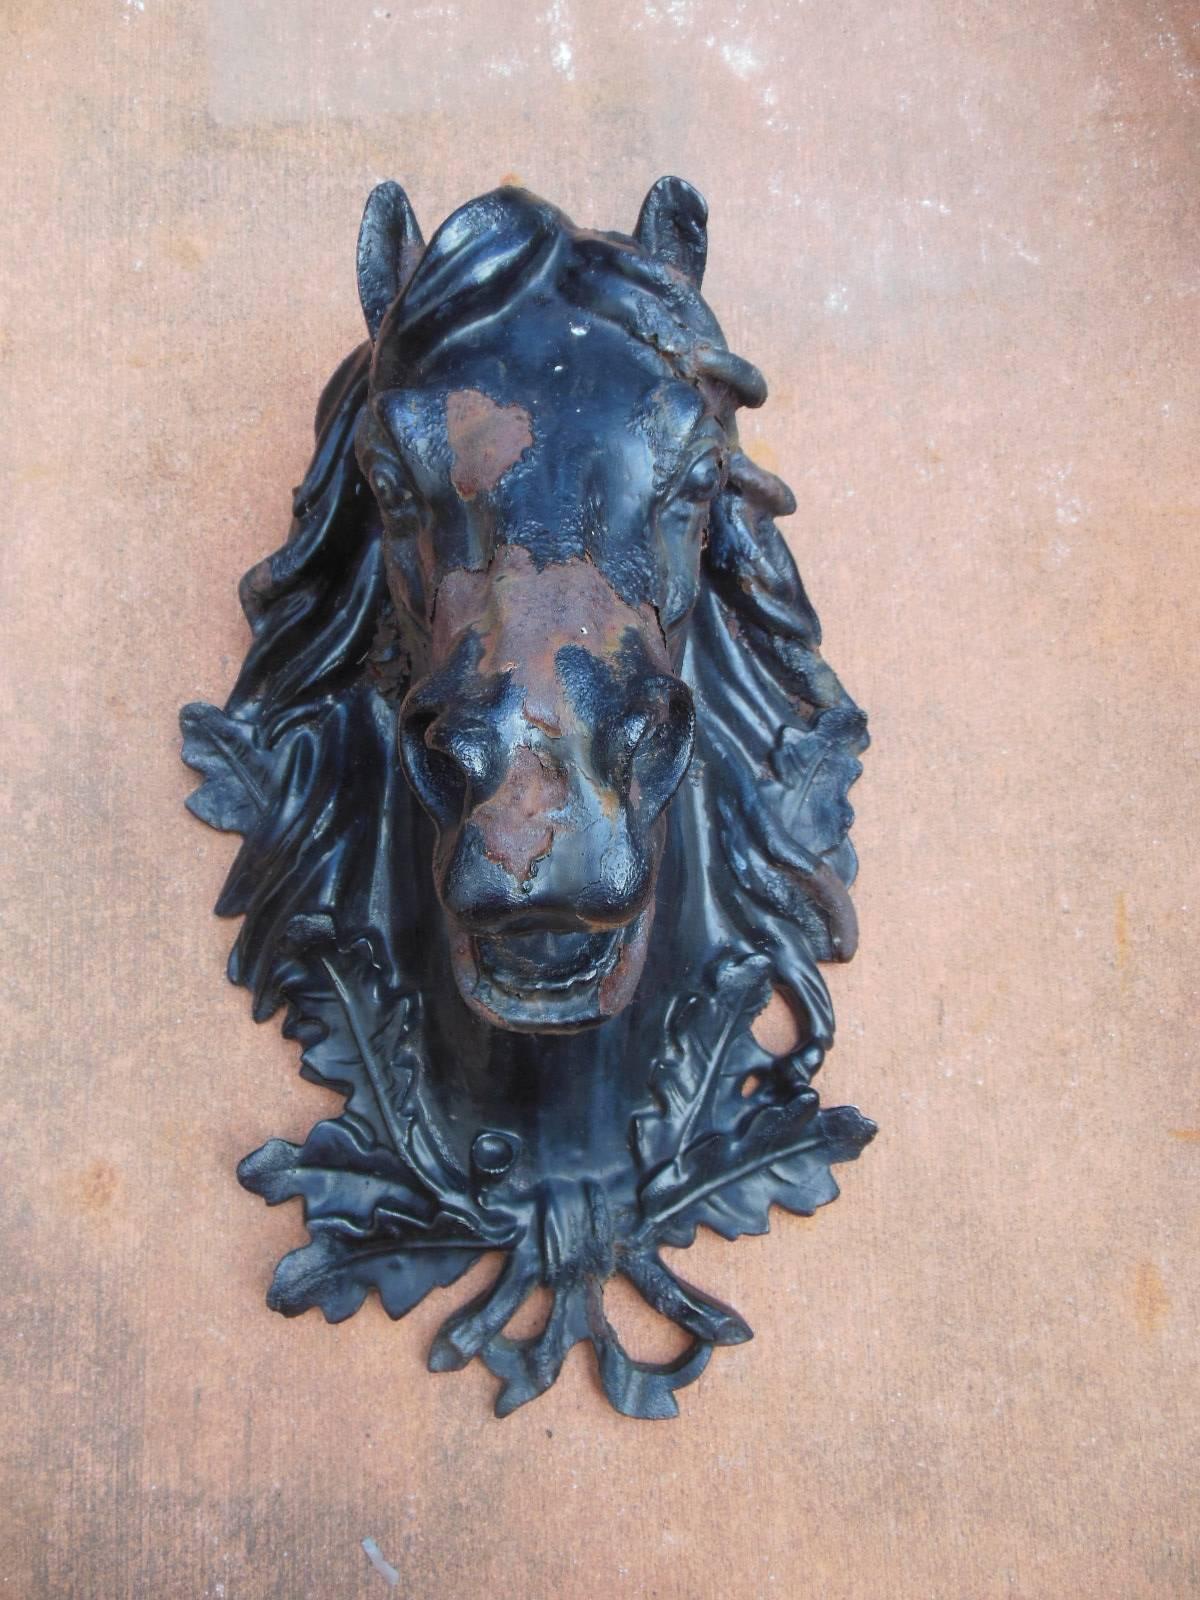 A antique cast iron horse head with excellent detail. The cast iron horse head may have been designed to be mounted on a wall of a commercial stabile or tack shop. The finish of the horse exhibits some paint loss which is also indicative of its age.